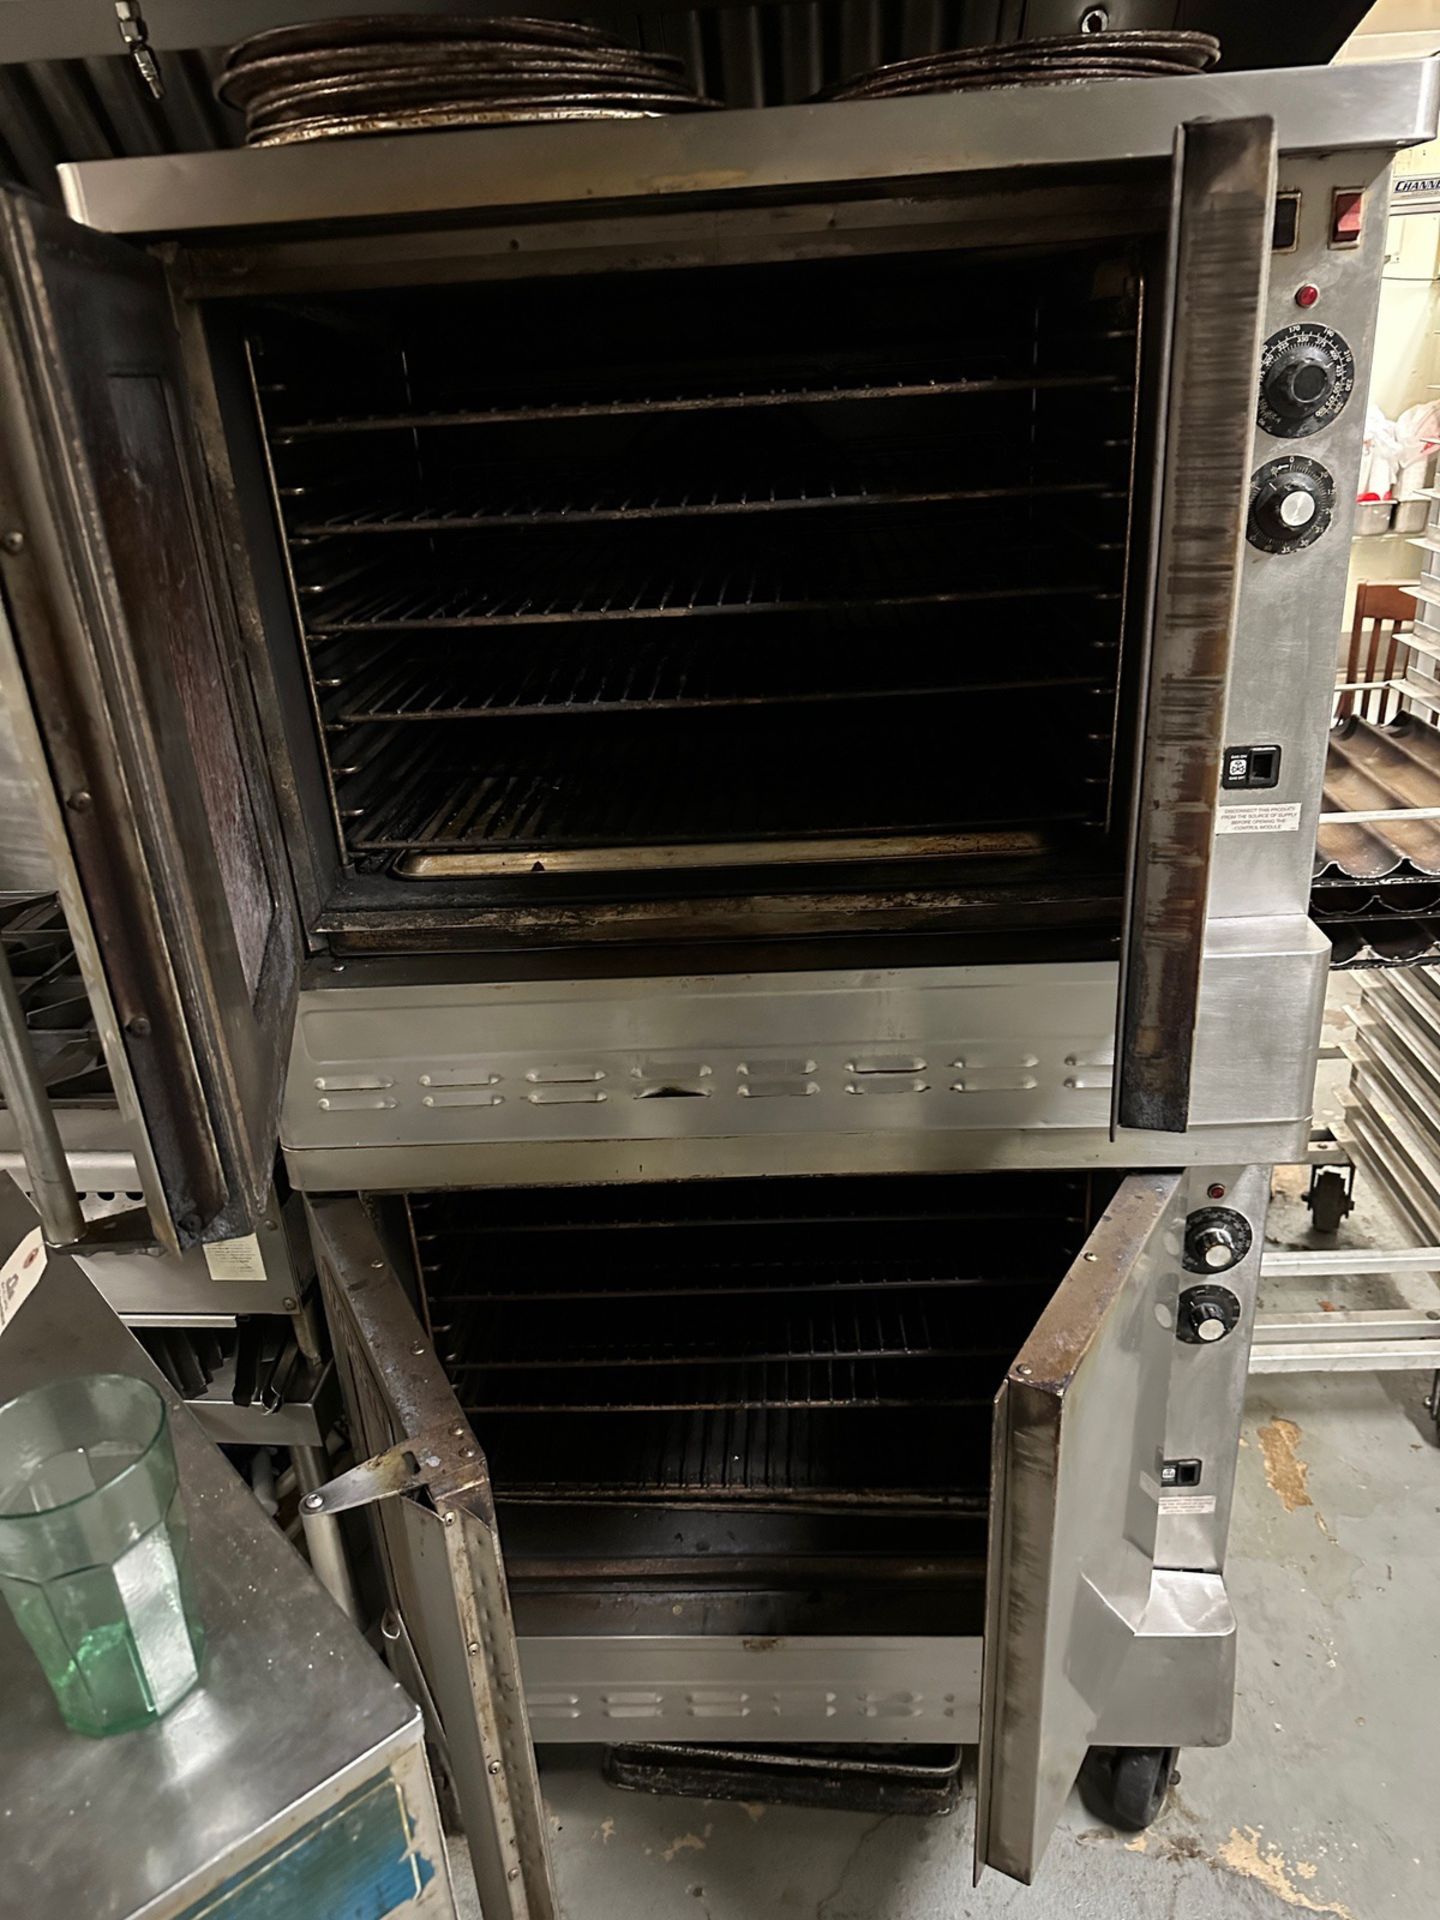 Blodgett Dual Stacked Ovens with Baking Sheets - Subj to Bulk | Rig Fee $200 - Image 2 of 3